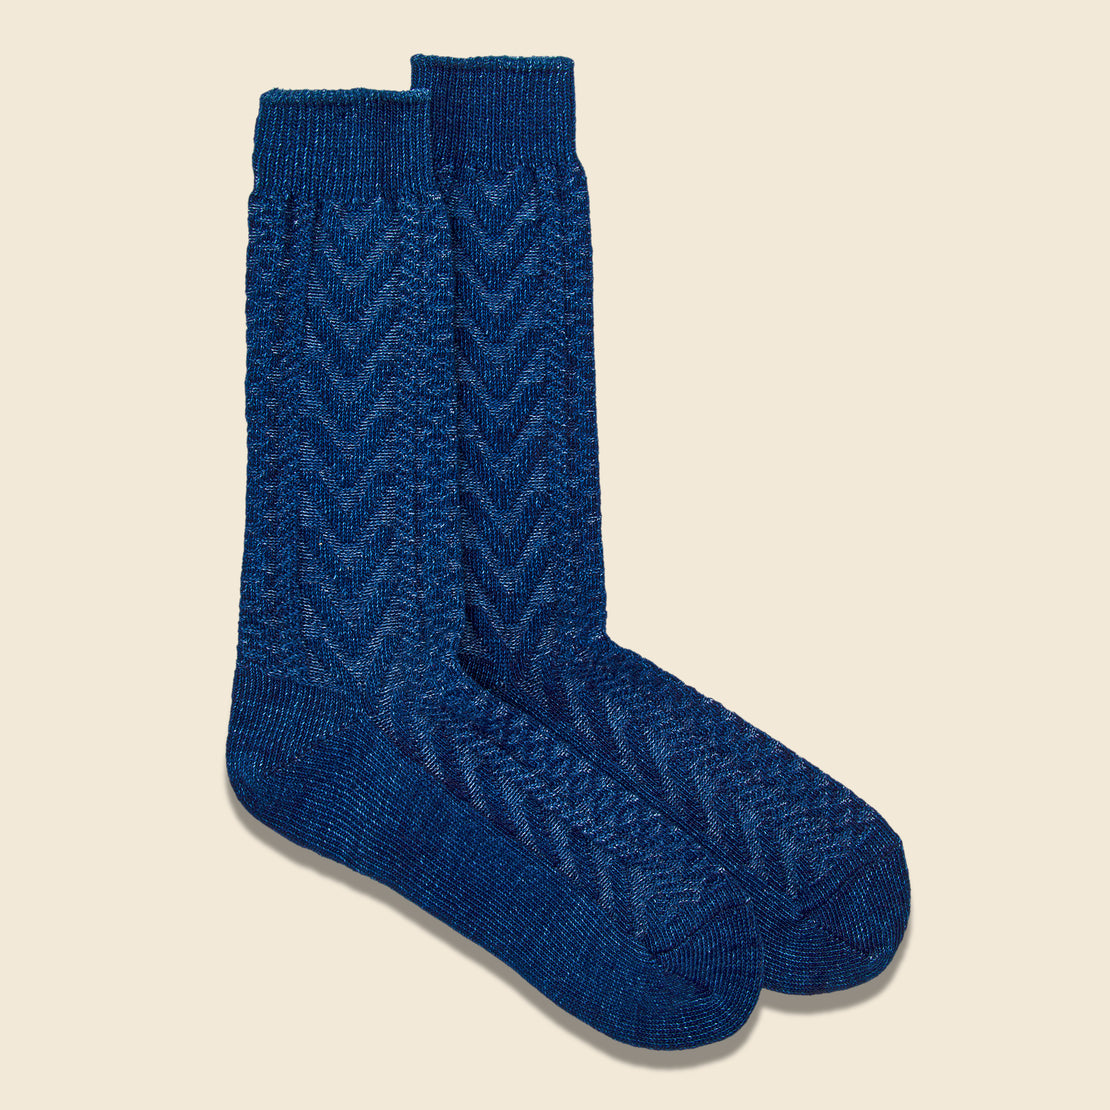 Indigo Cable Knit Sock - Navy - Anonymous Ism - STAG Provisions - Accessories - Socks